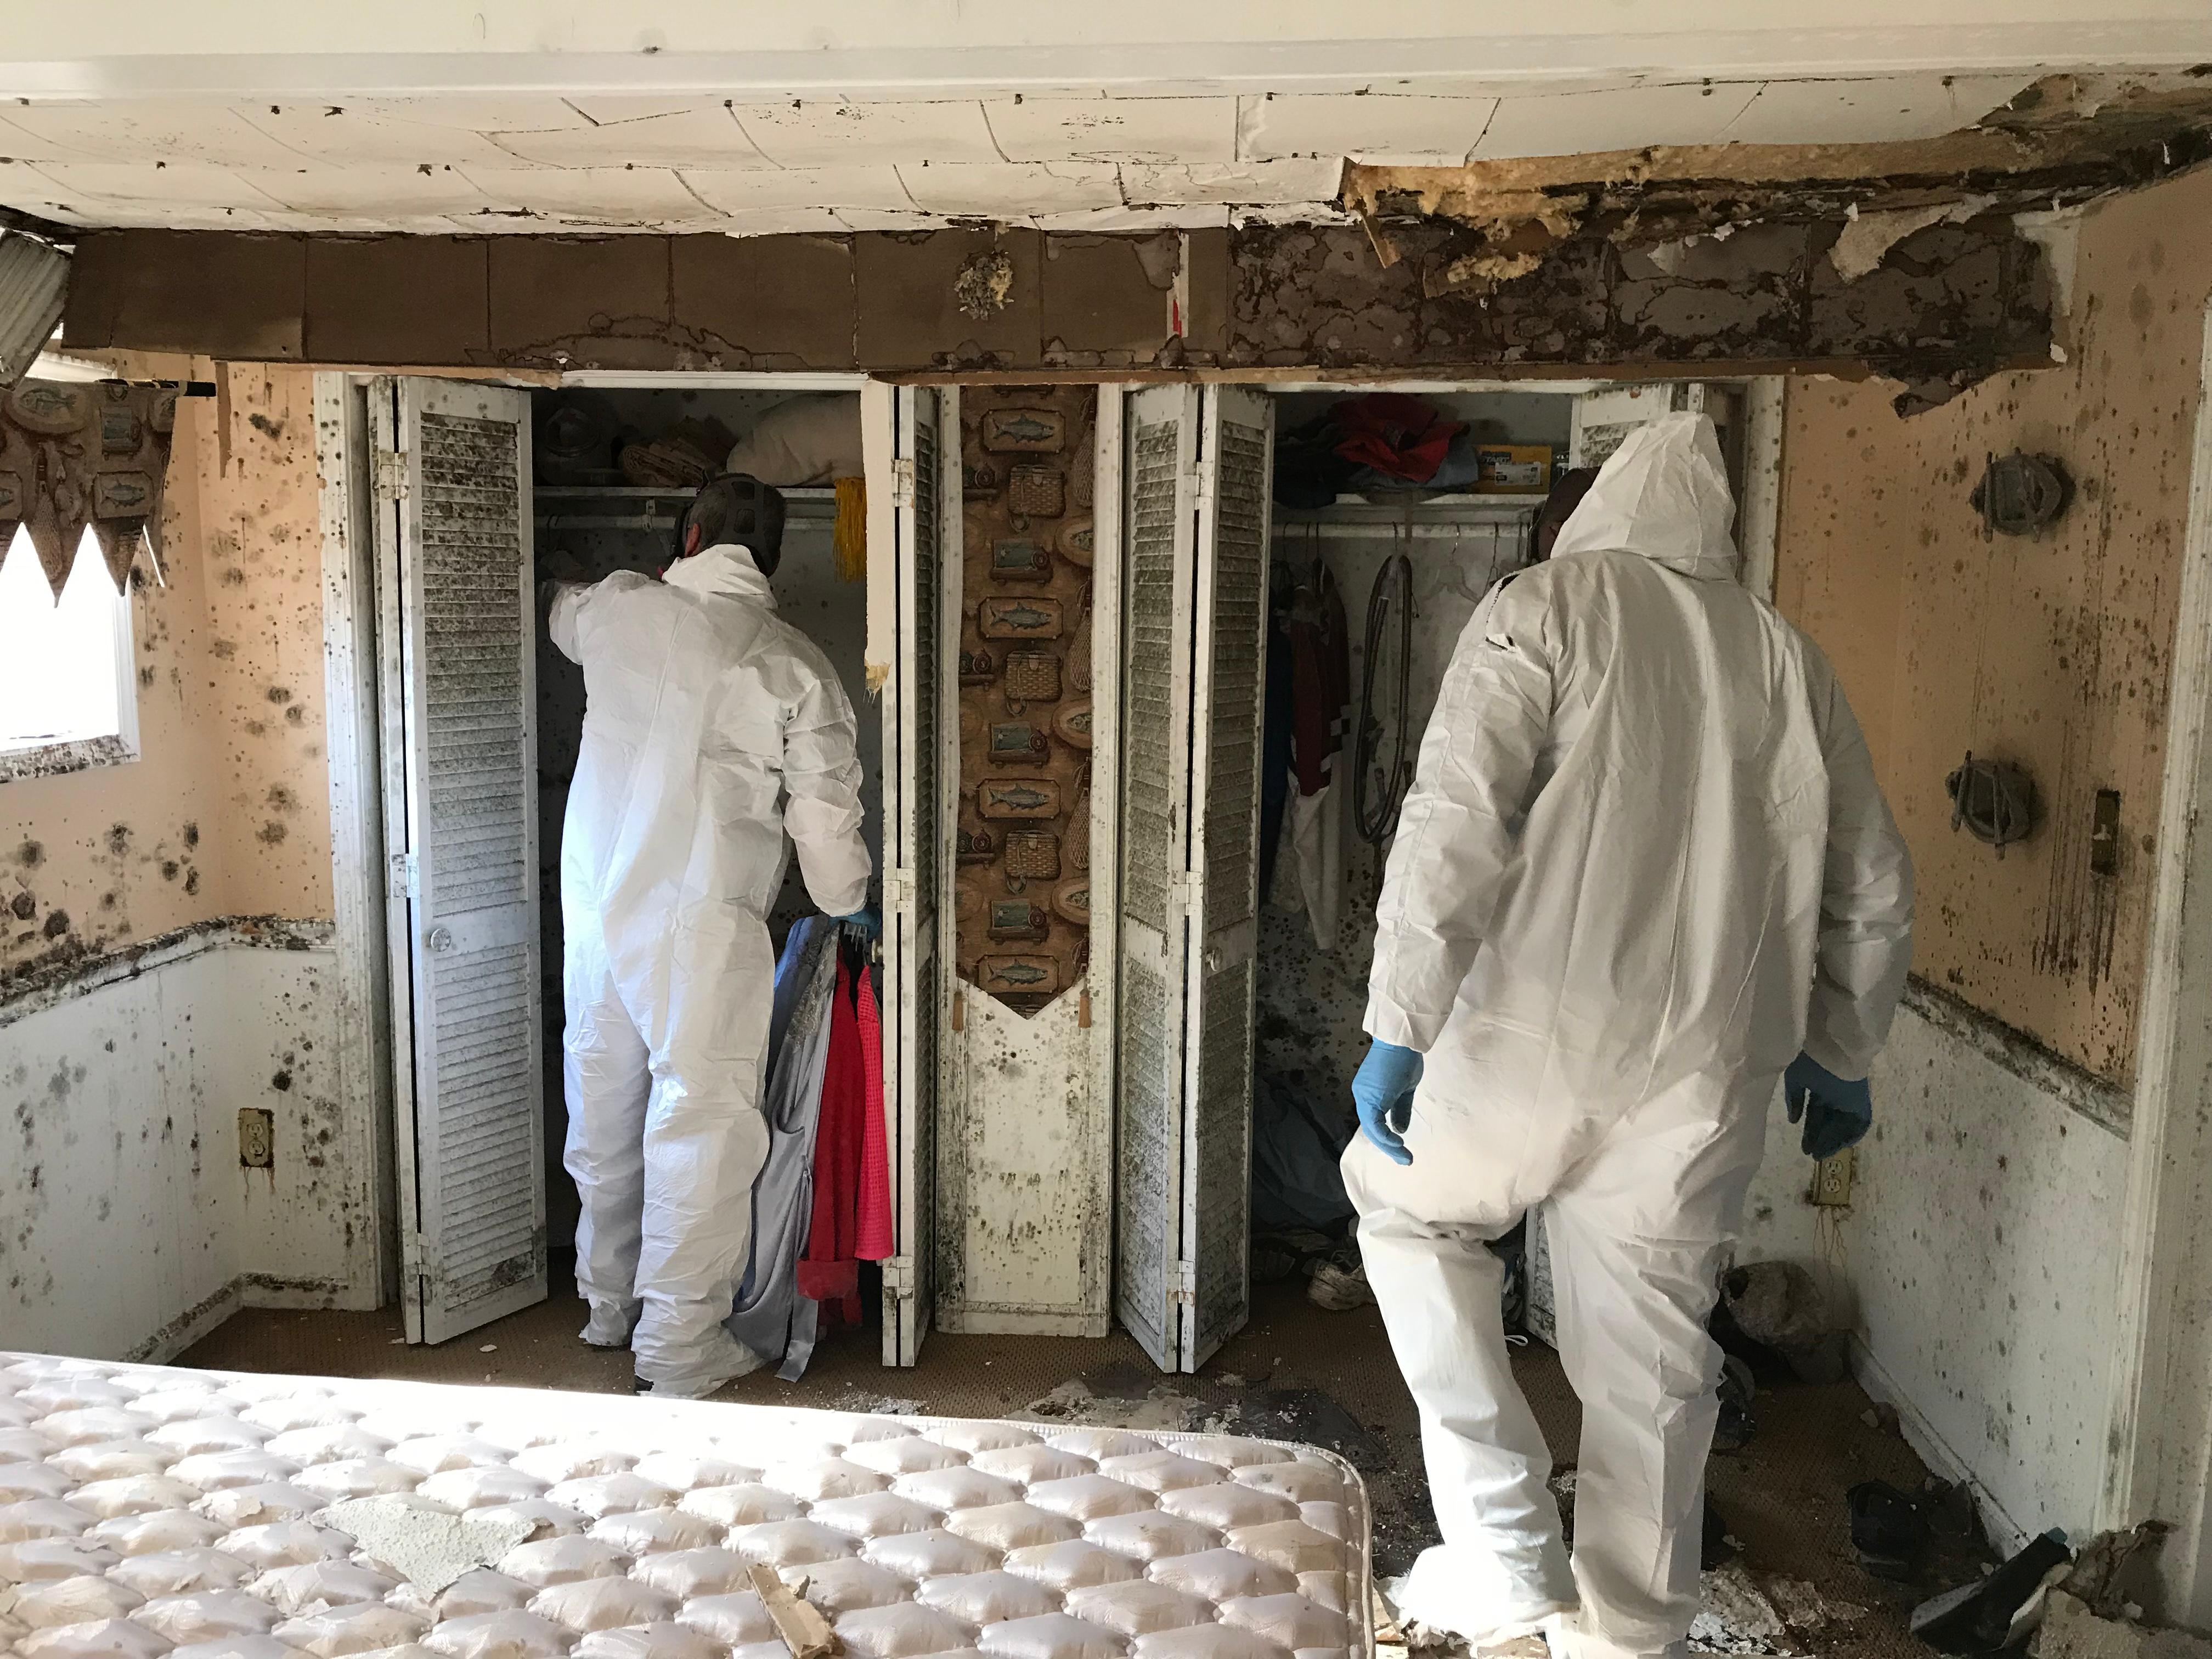 Mold took over this home, but our team removed the infested materials and sealed the mold so it could be restored to its previous condition.